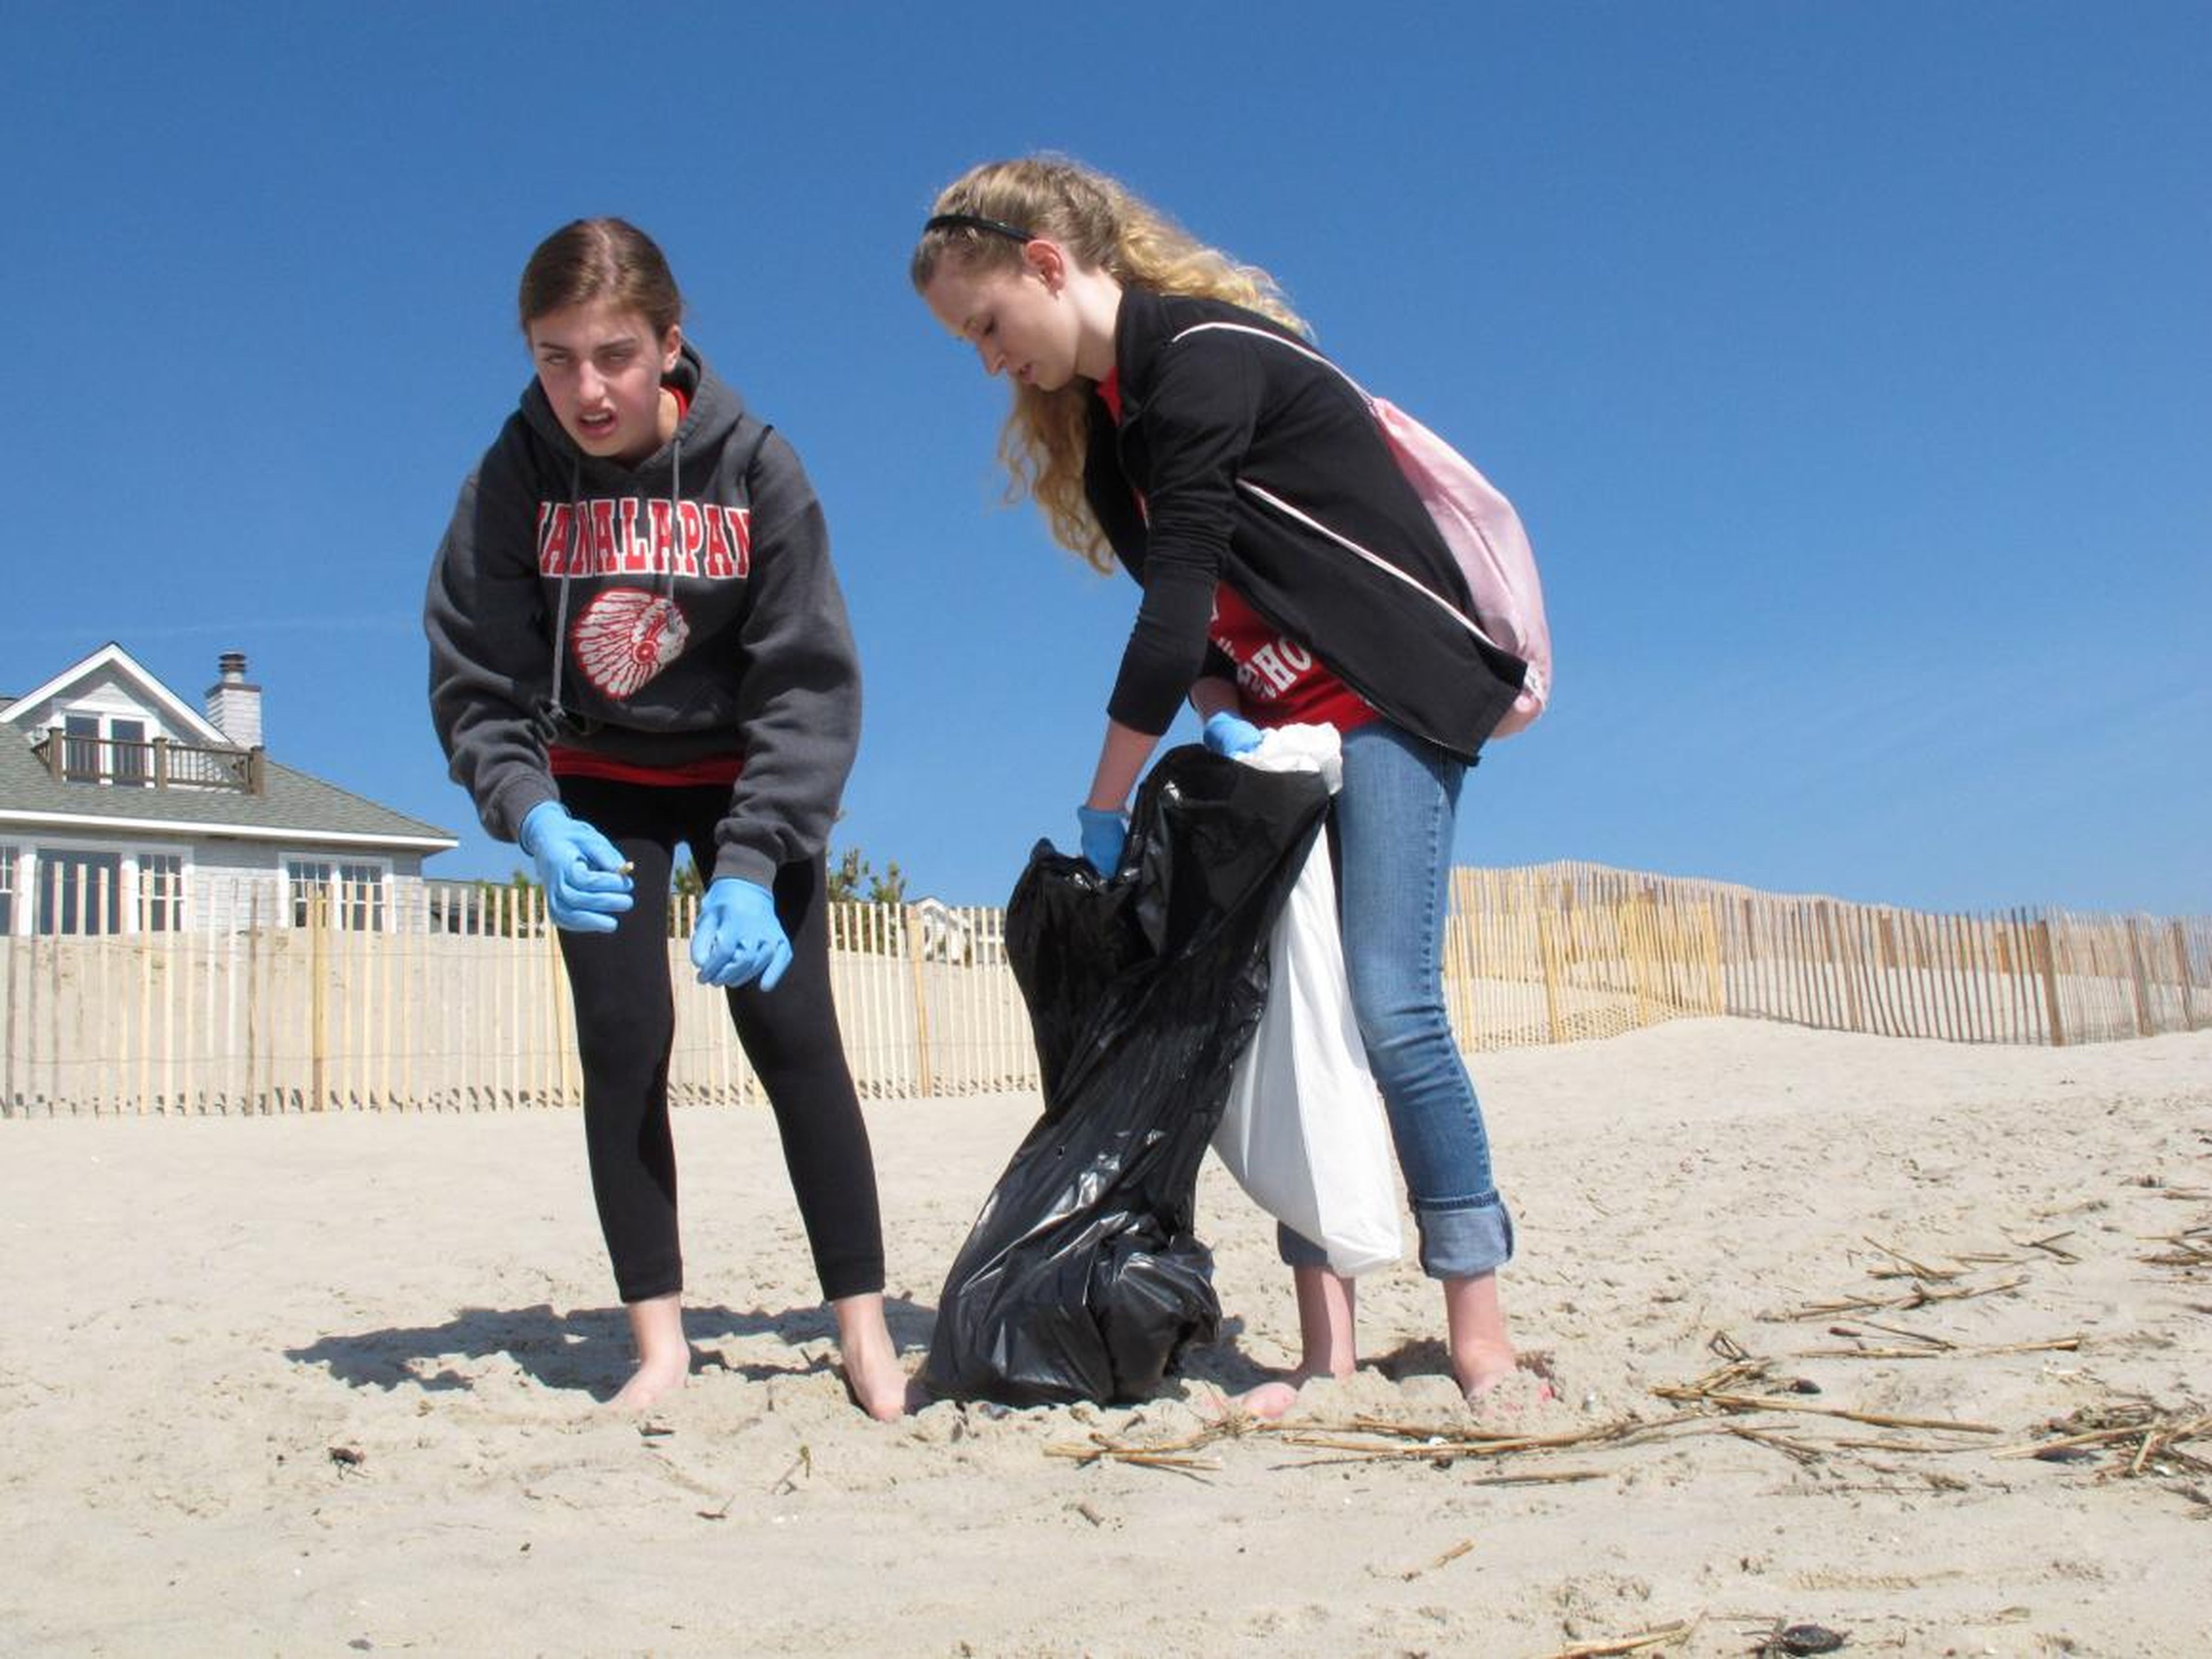 In an April 21, 2012 photo, Melissa Shapero reacts with disgust after picking up a cigarette butt from the beach in Point Pleasant Beach N.J. as Sarah Steward holds a trash bag for her.